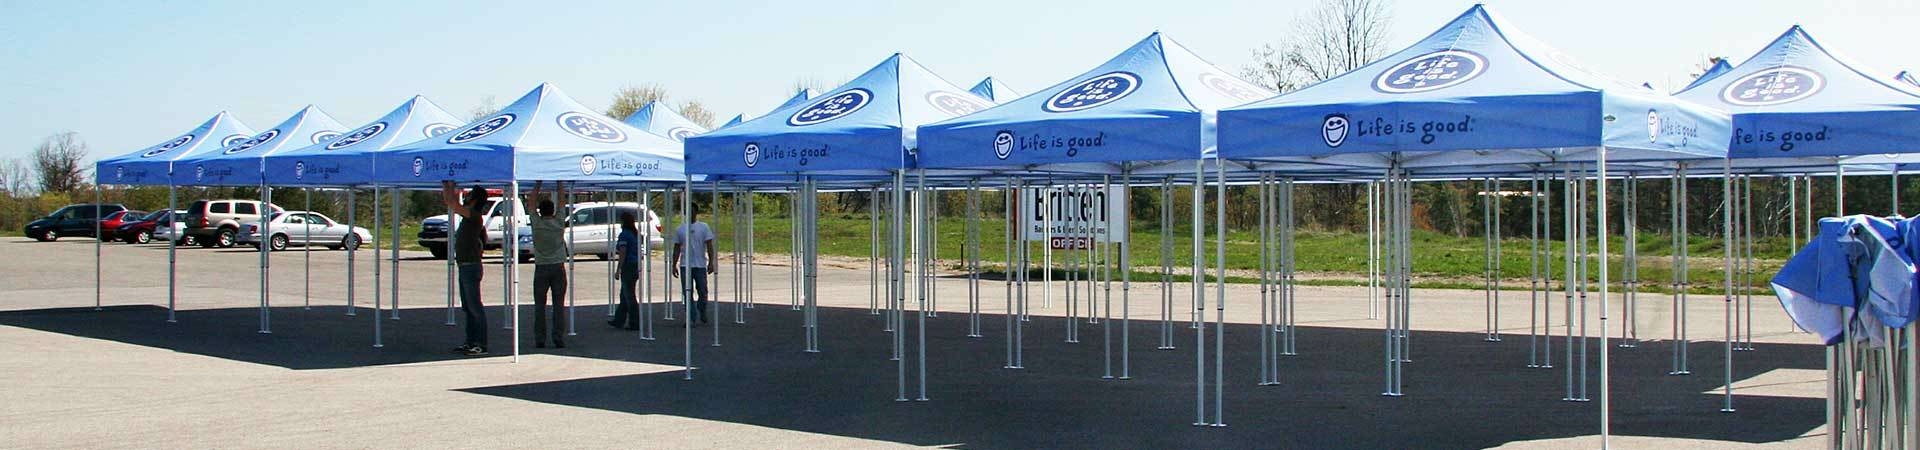 Custom printed tents with sponsor logo on top.